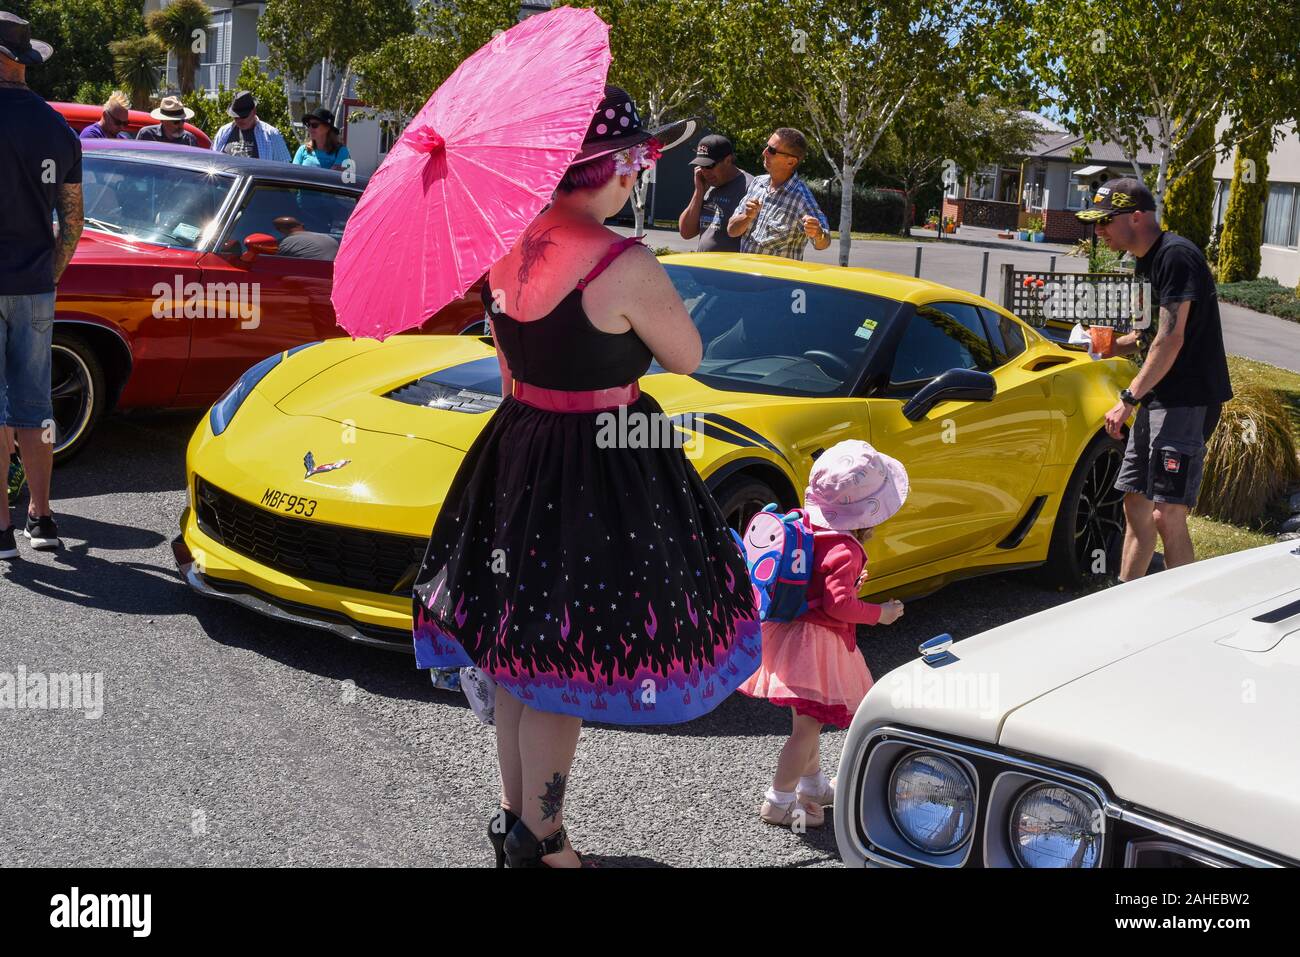 Methven, New Zealand. 28th Dec 2019. A sunny day brings out the crowds and the sunshades for a gathering of hot rods and other custom cars on the southern island of New Zealand Stock Photo